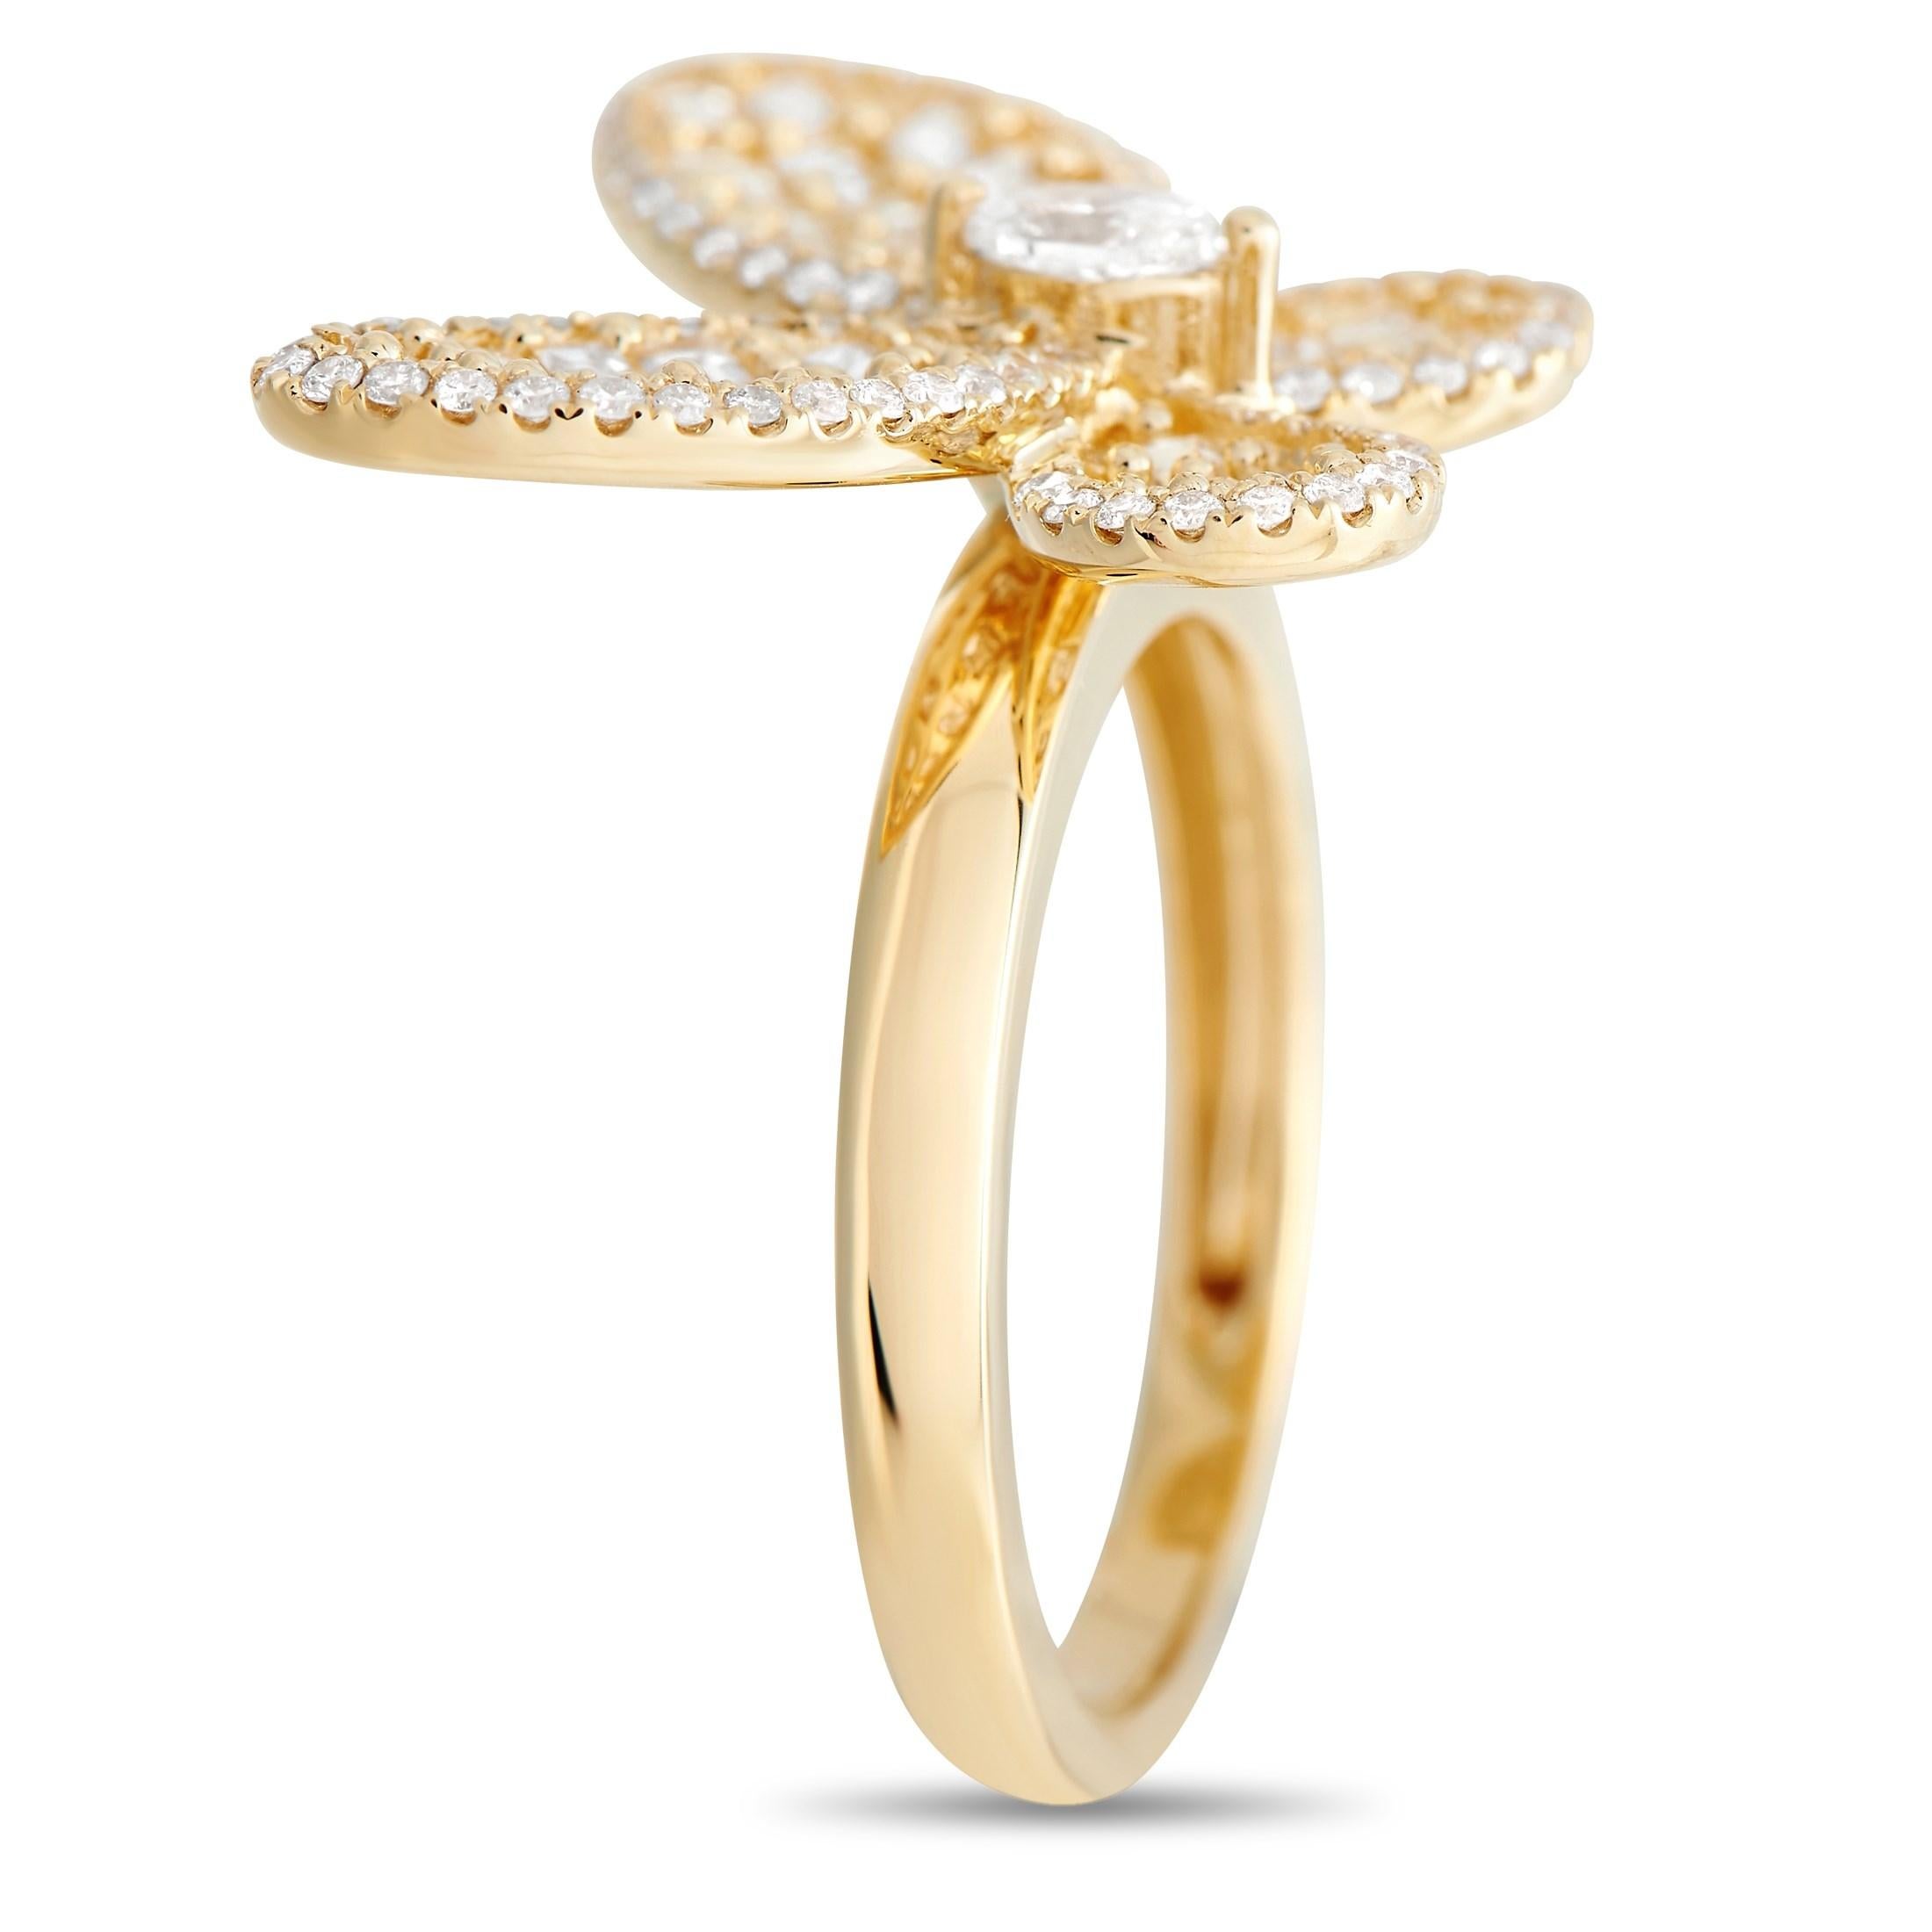 Luxurious and charming at the exact same time, this radiant ring will forever capture your imagination. On the top of this piece’s 2mm wide band, an elegant butterfly motif shines to life thanks to 0.91 carats of fancy cut diamonds and additional